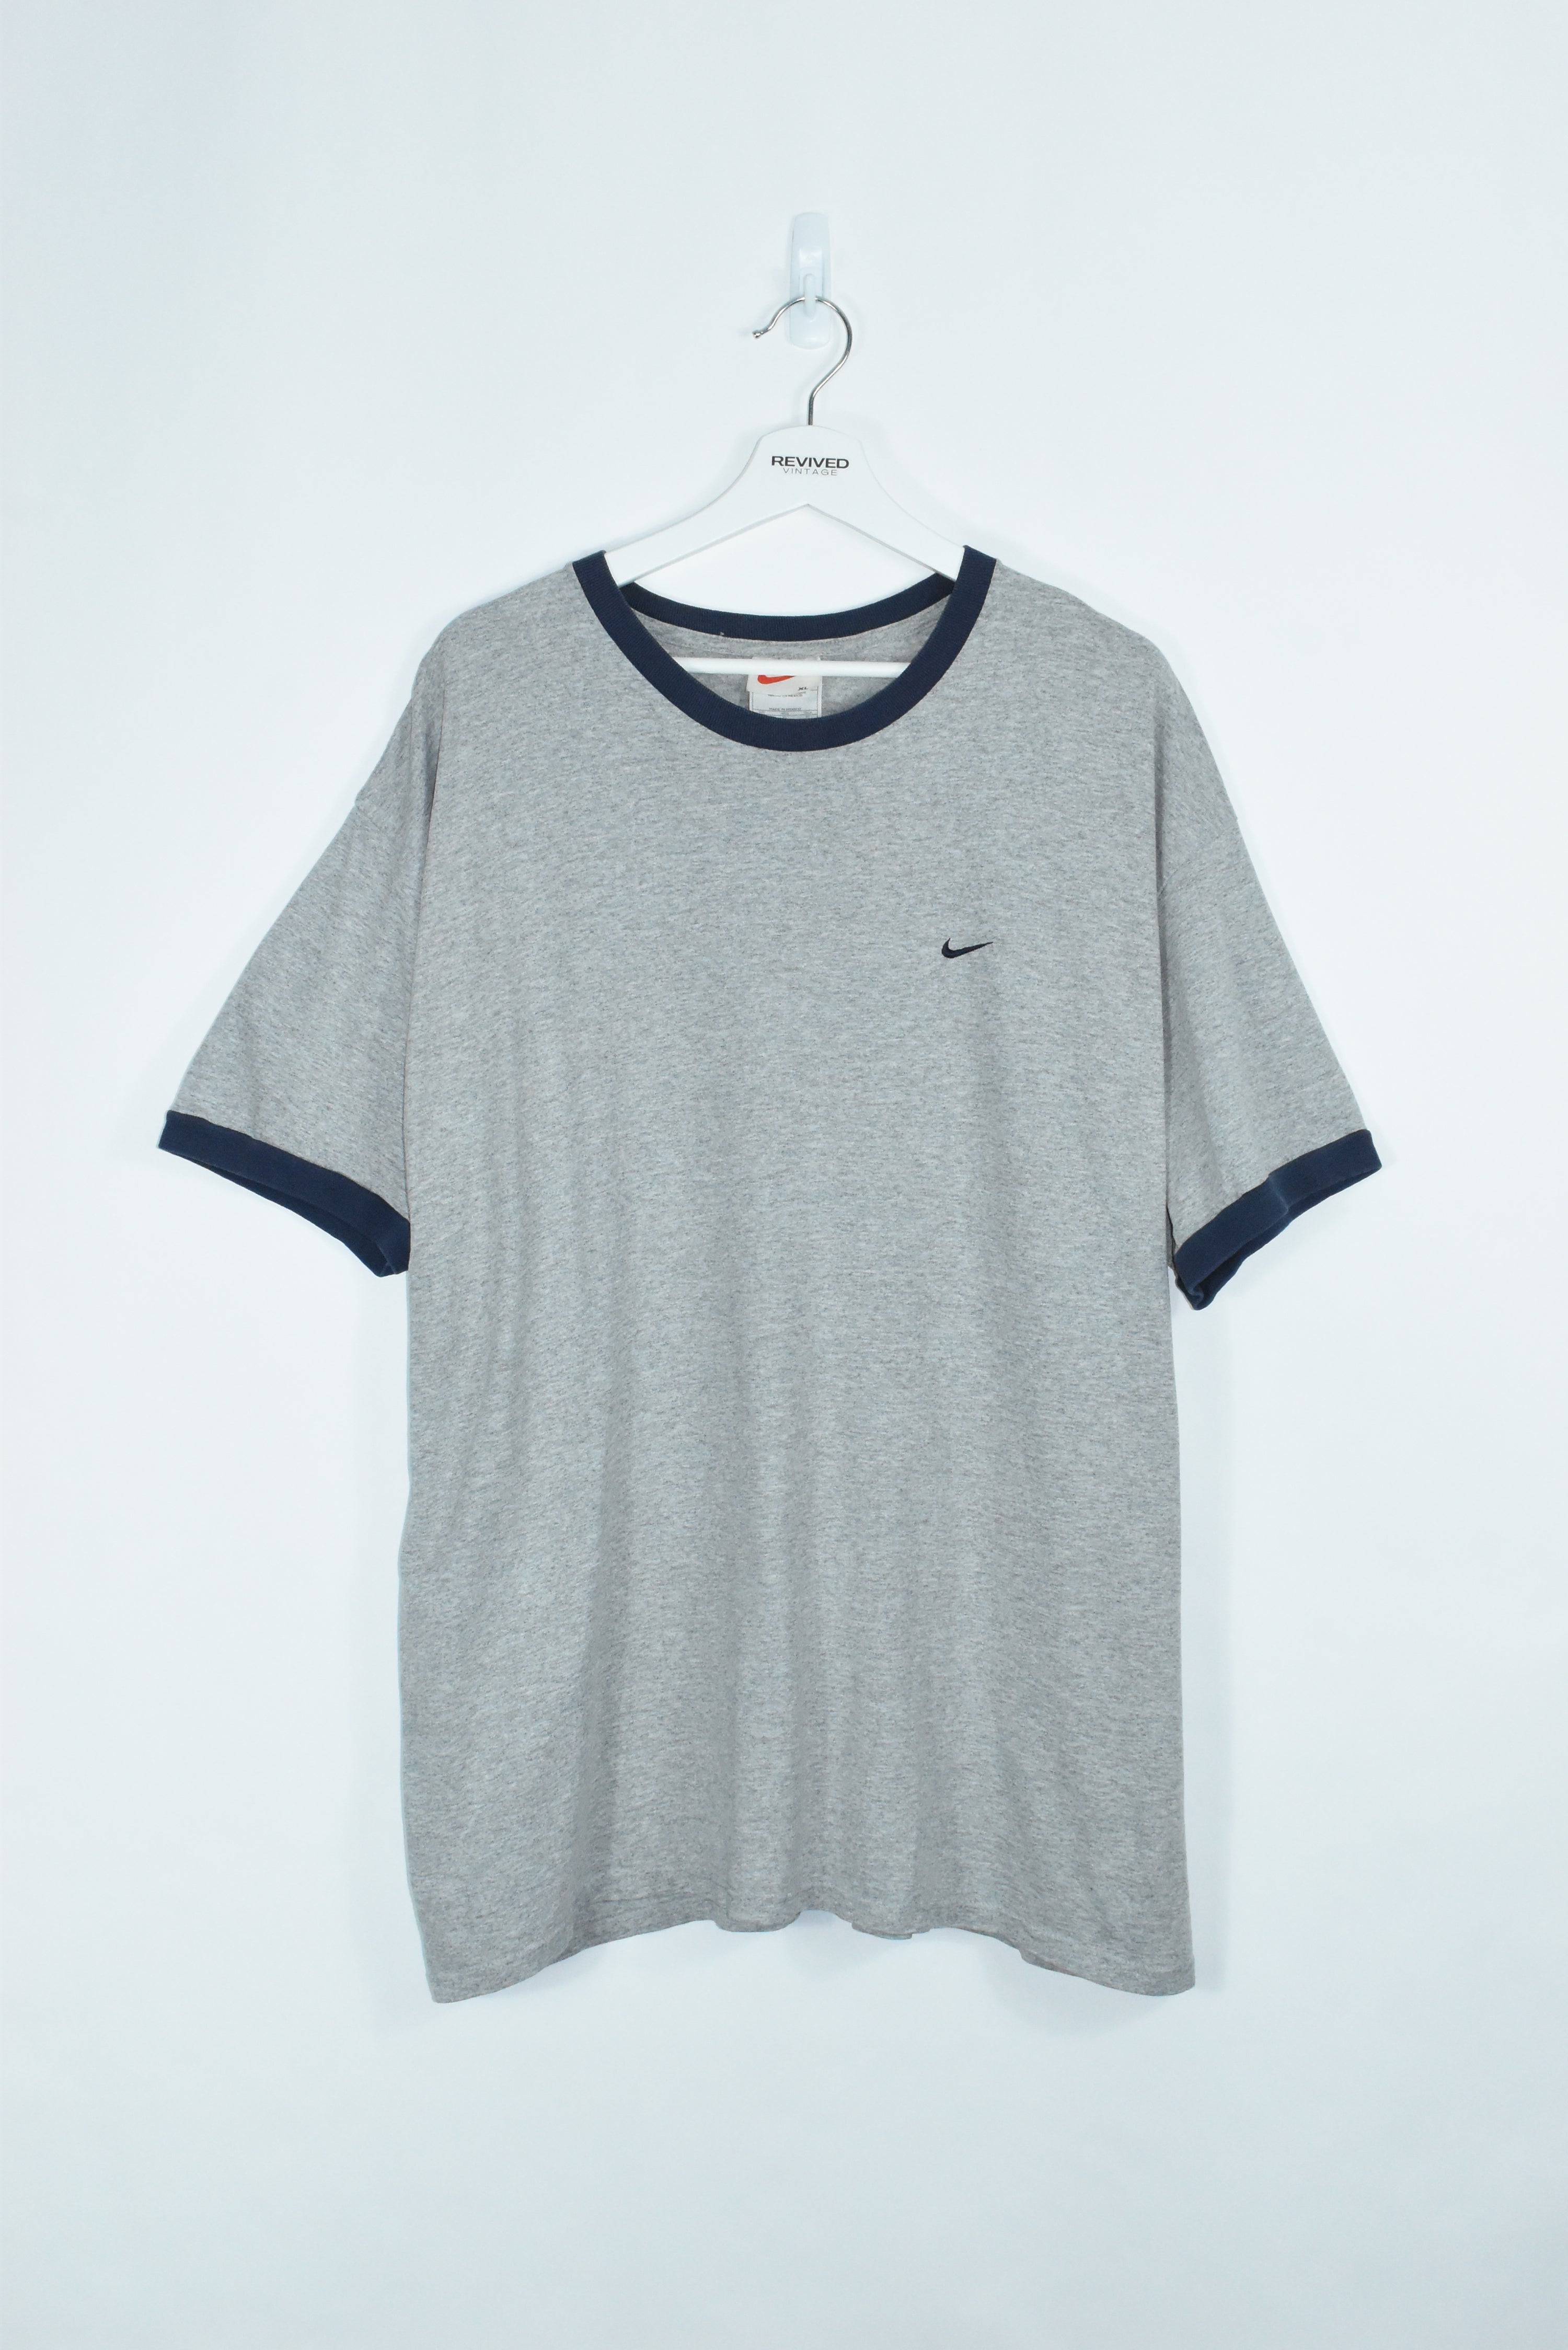 Vintage Nike Embroidery Small Swoosh T Shirt XLARGE